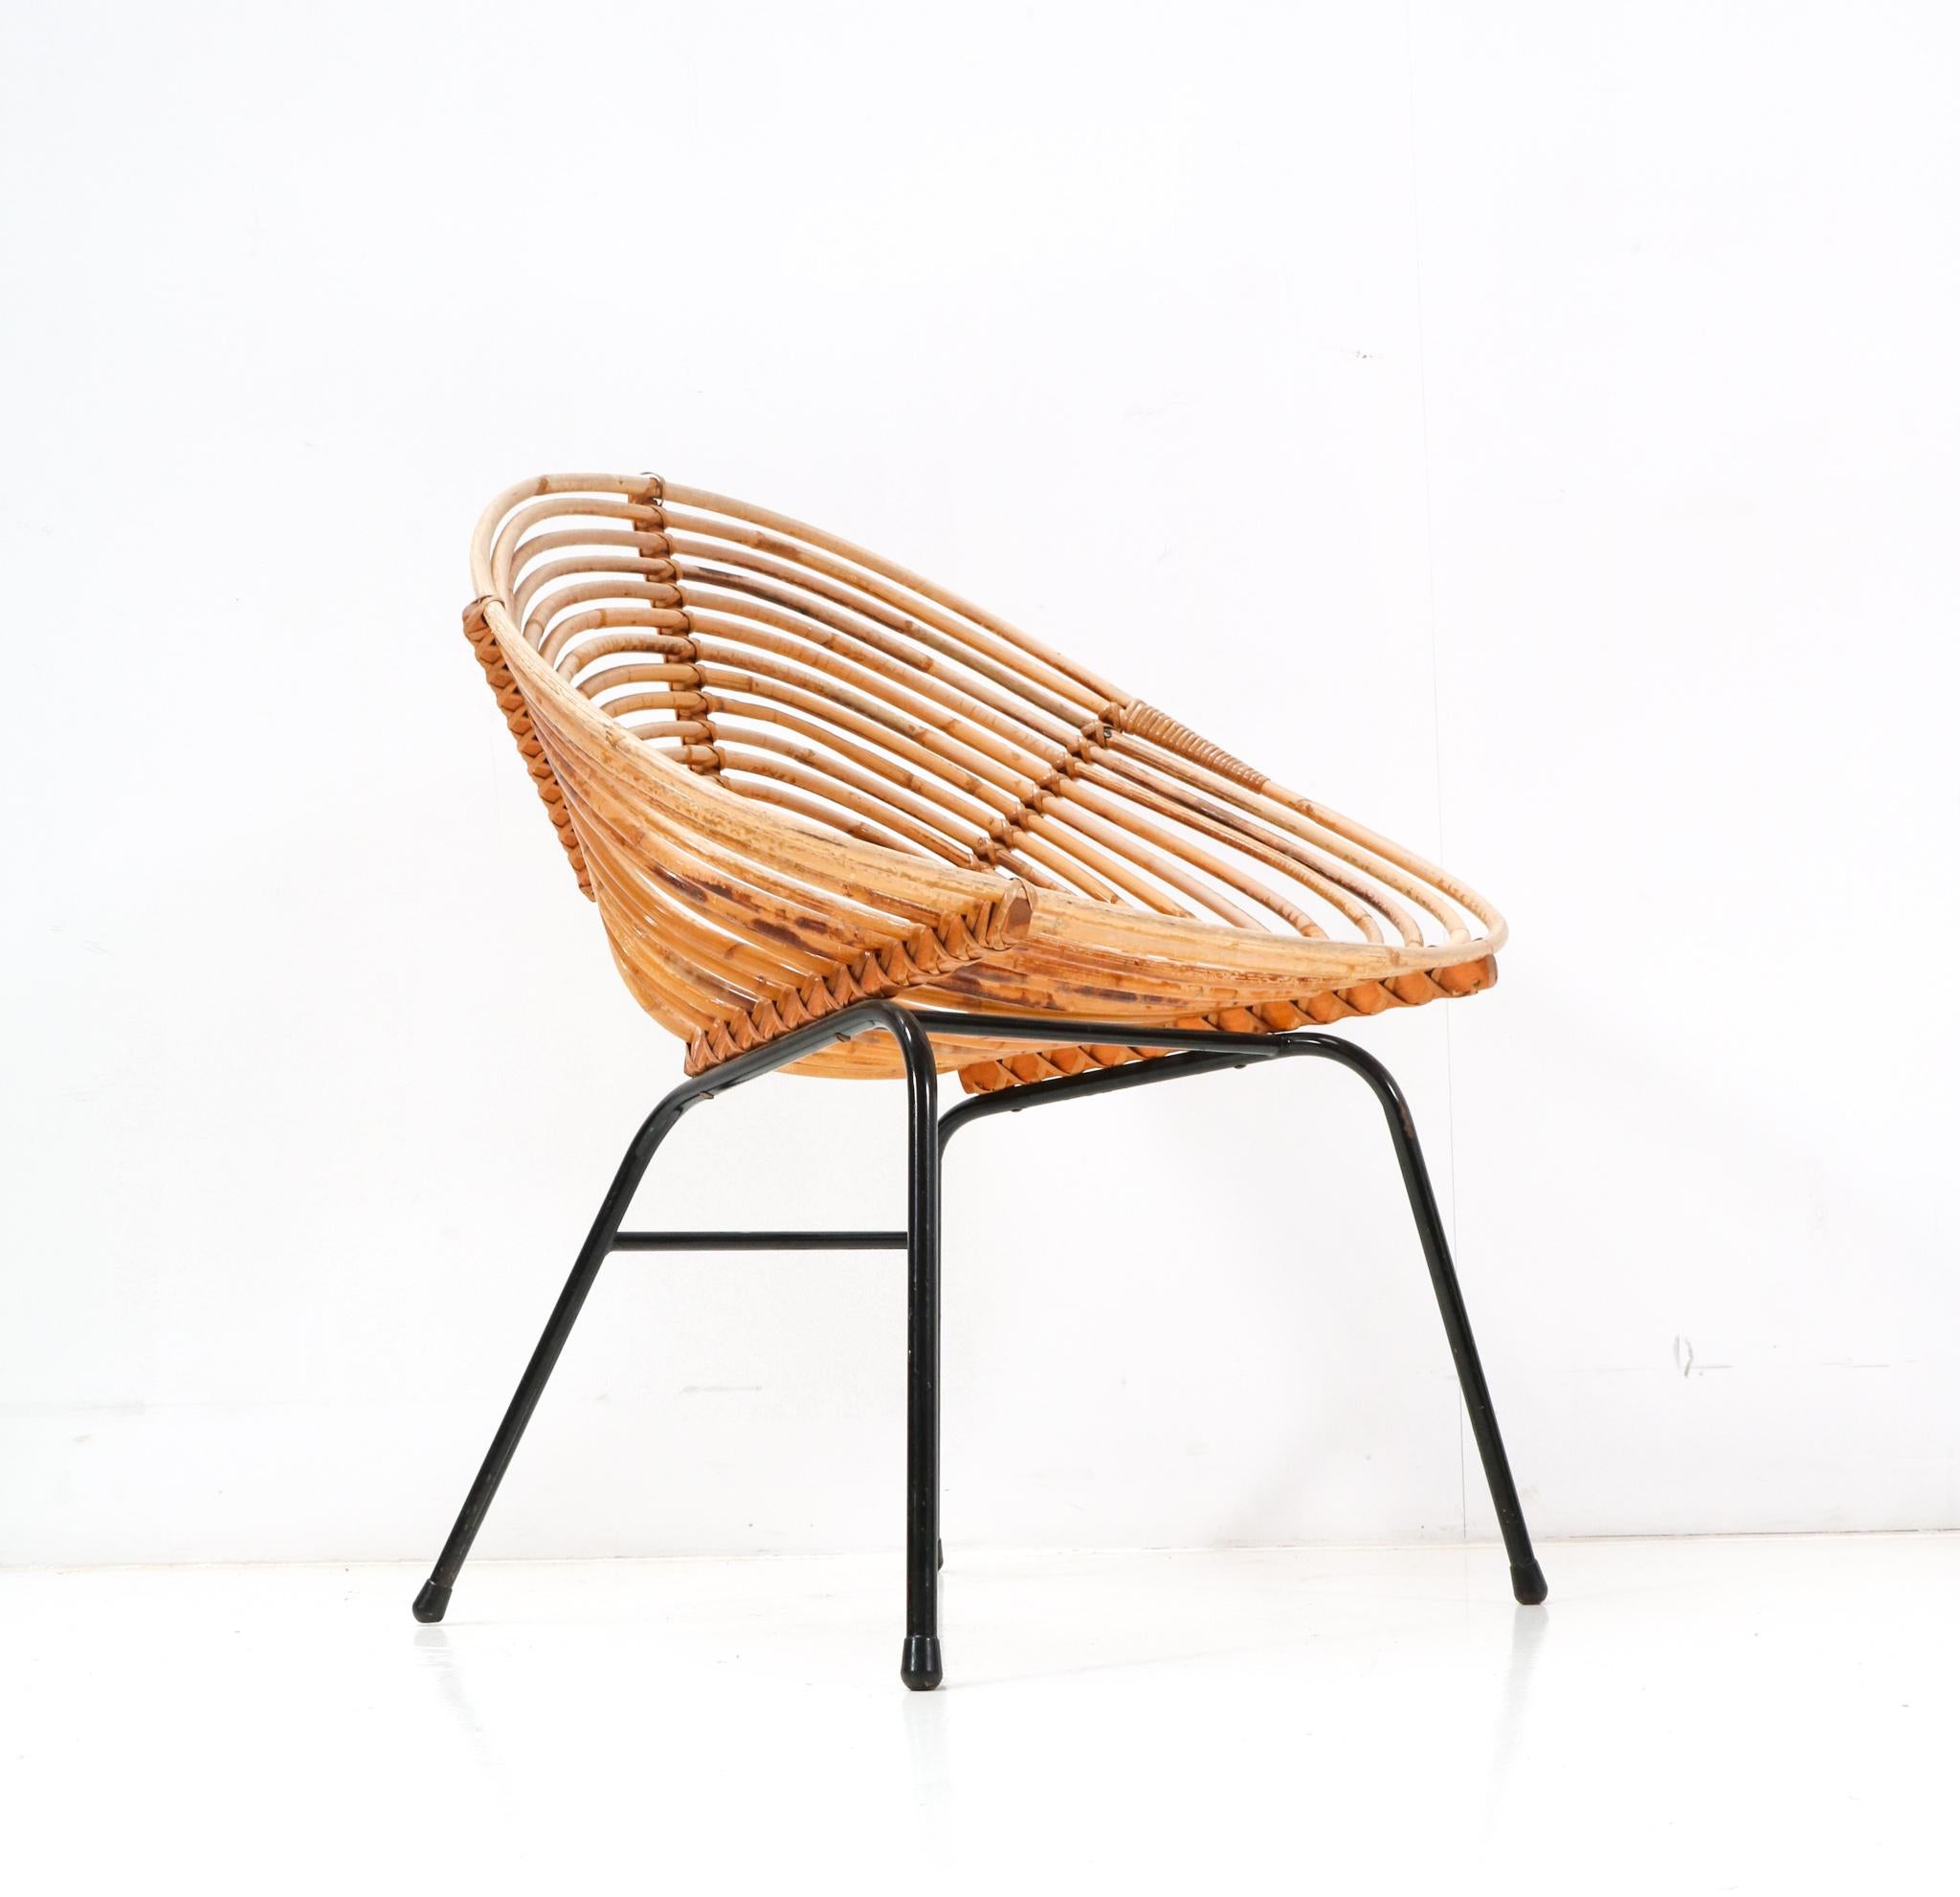 Rattan Mid-Century Modern Lounge Chair by Dirk van Sliedregt for Rohe, 1950s In Good Condition For Sale In Amsterdam, NL